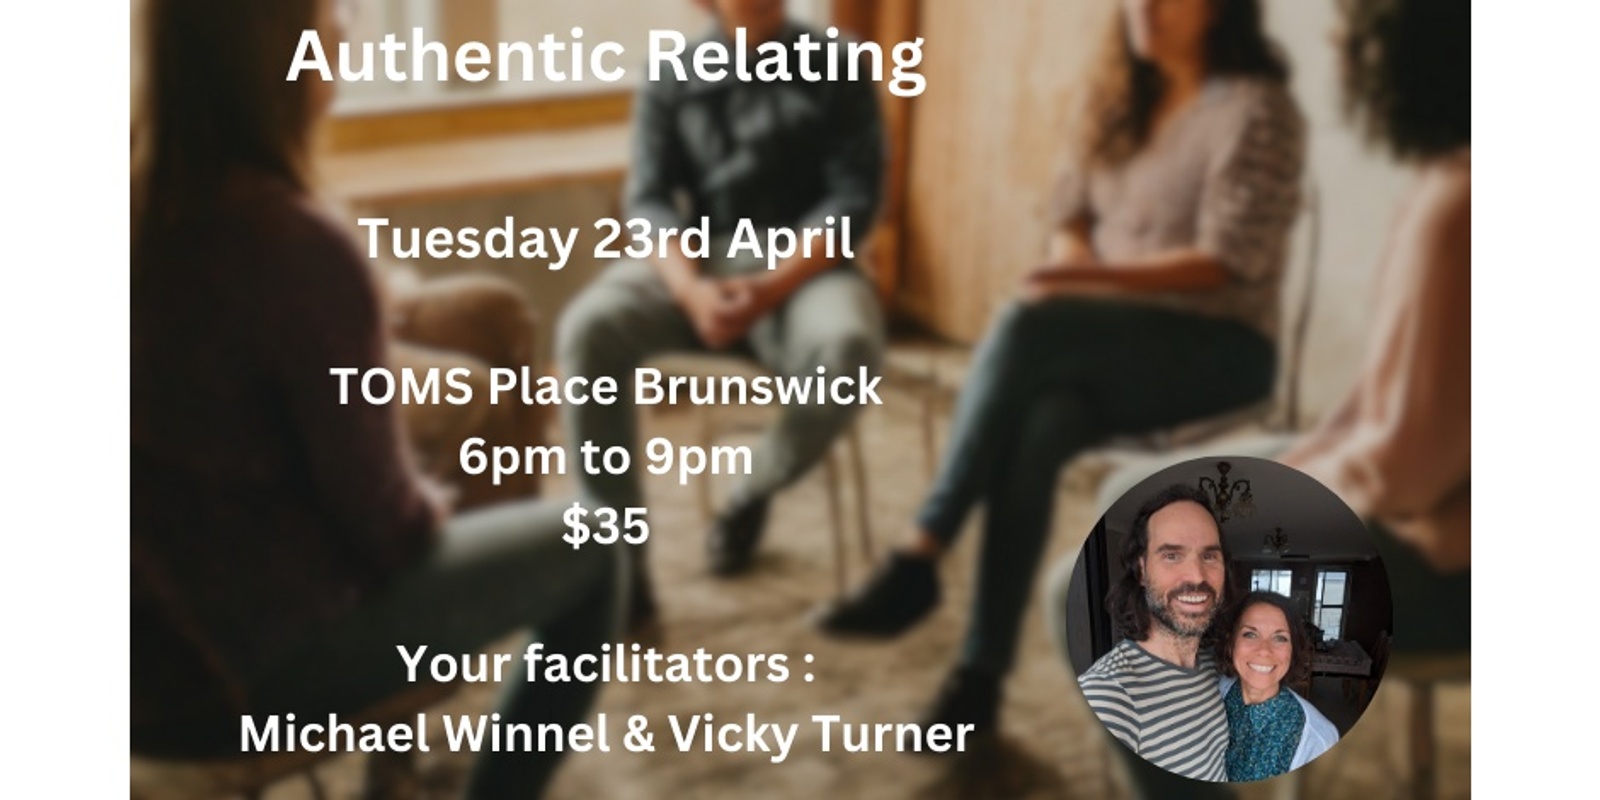 Banner image for Authentic Relating Games with Michael Winnel & Vicky Turner in Brunswick, Melbourne  - Tuesday 23rd April 6pm to 9pm